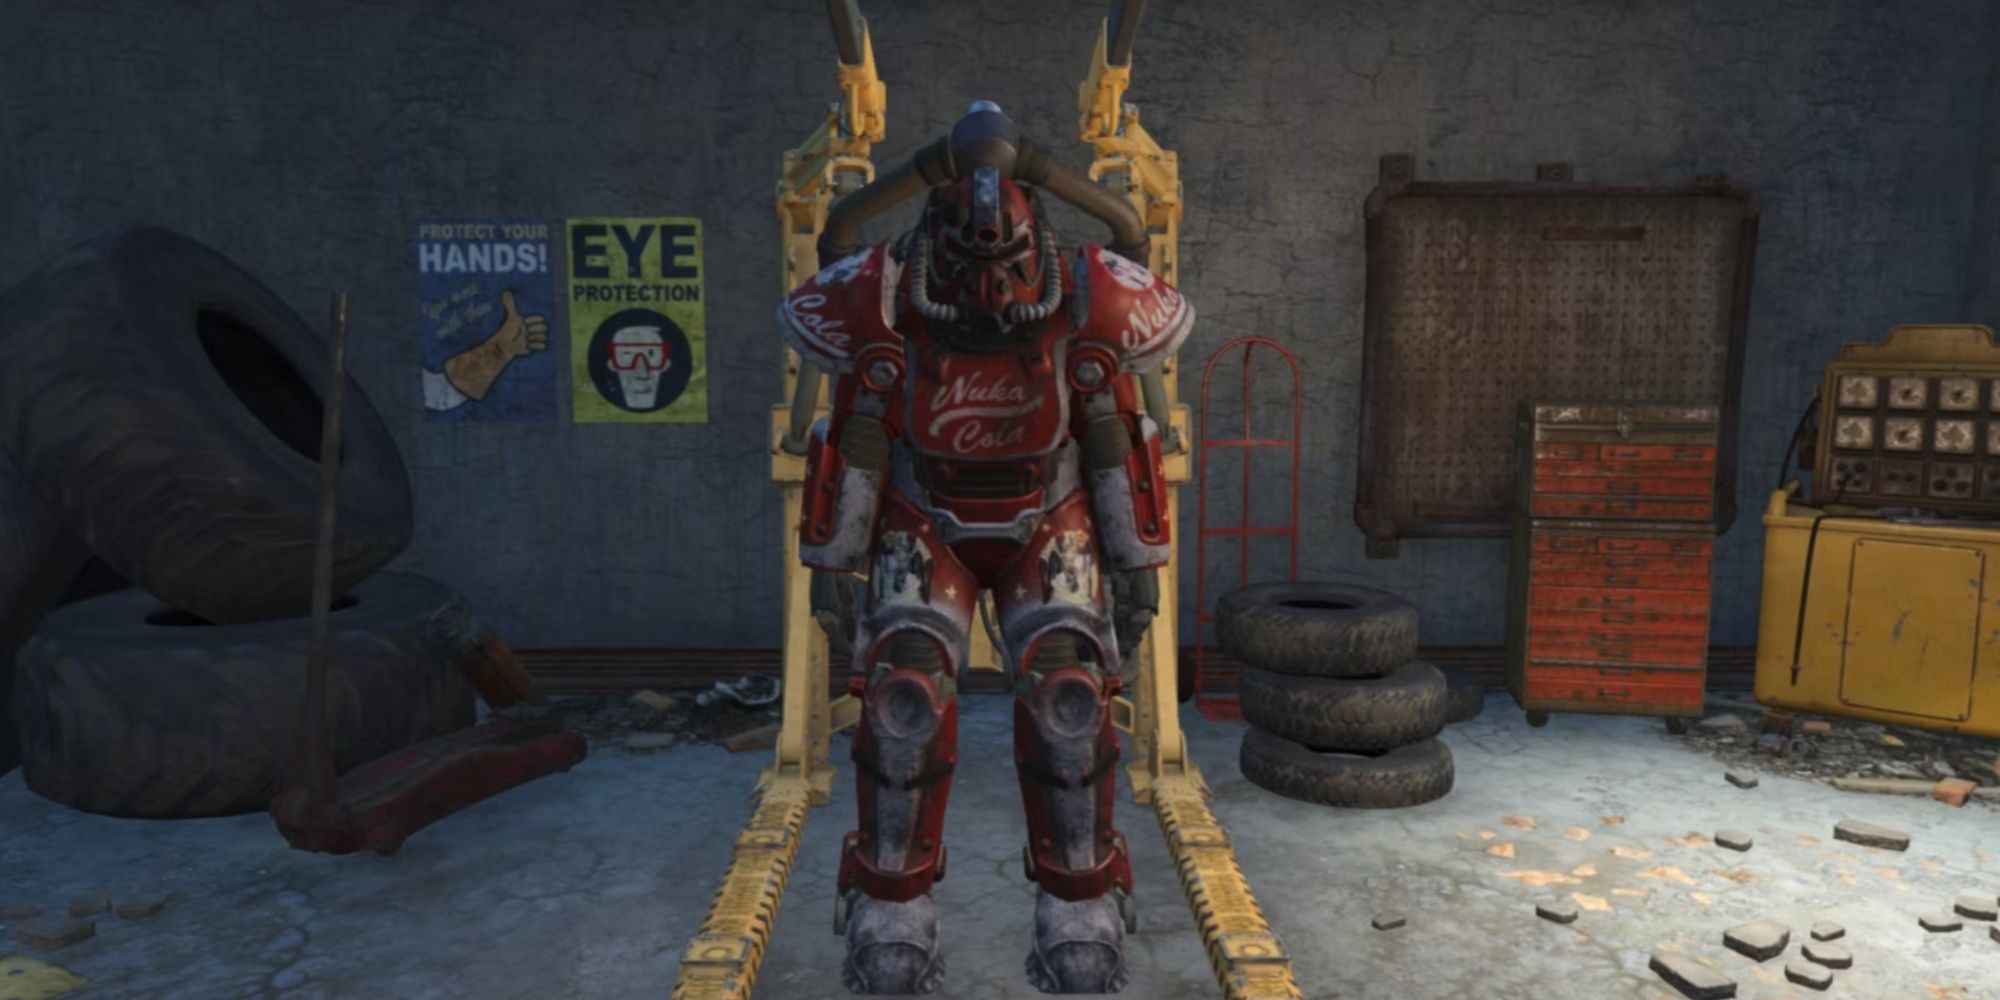 Nuka T-51 power armor at red rocket stop in Fallout 4